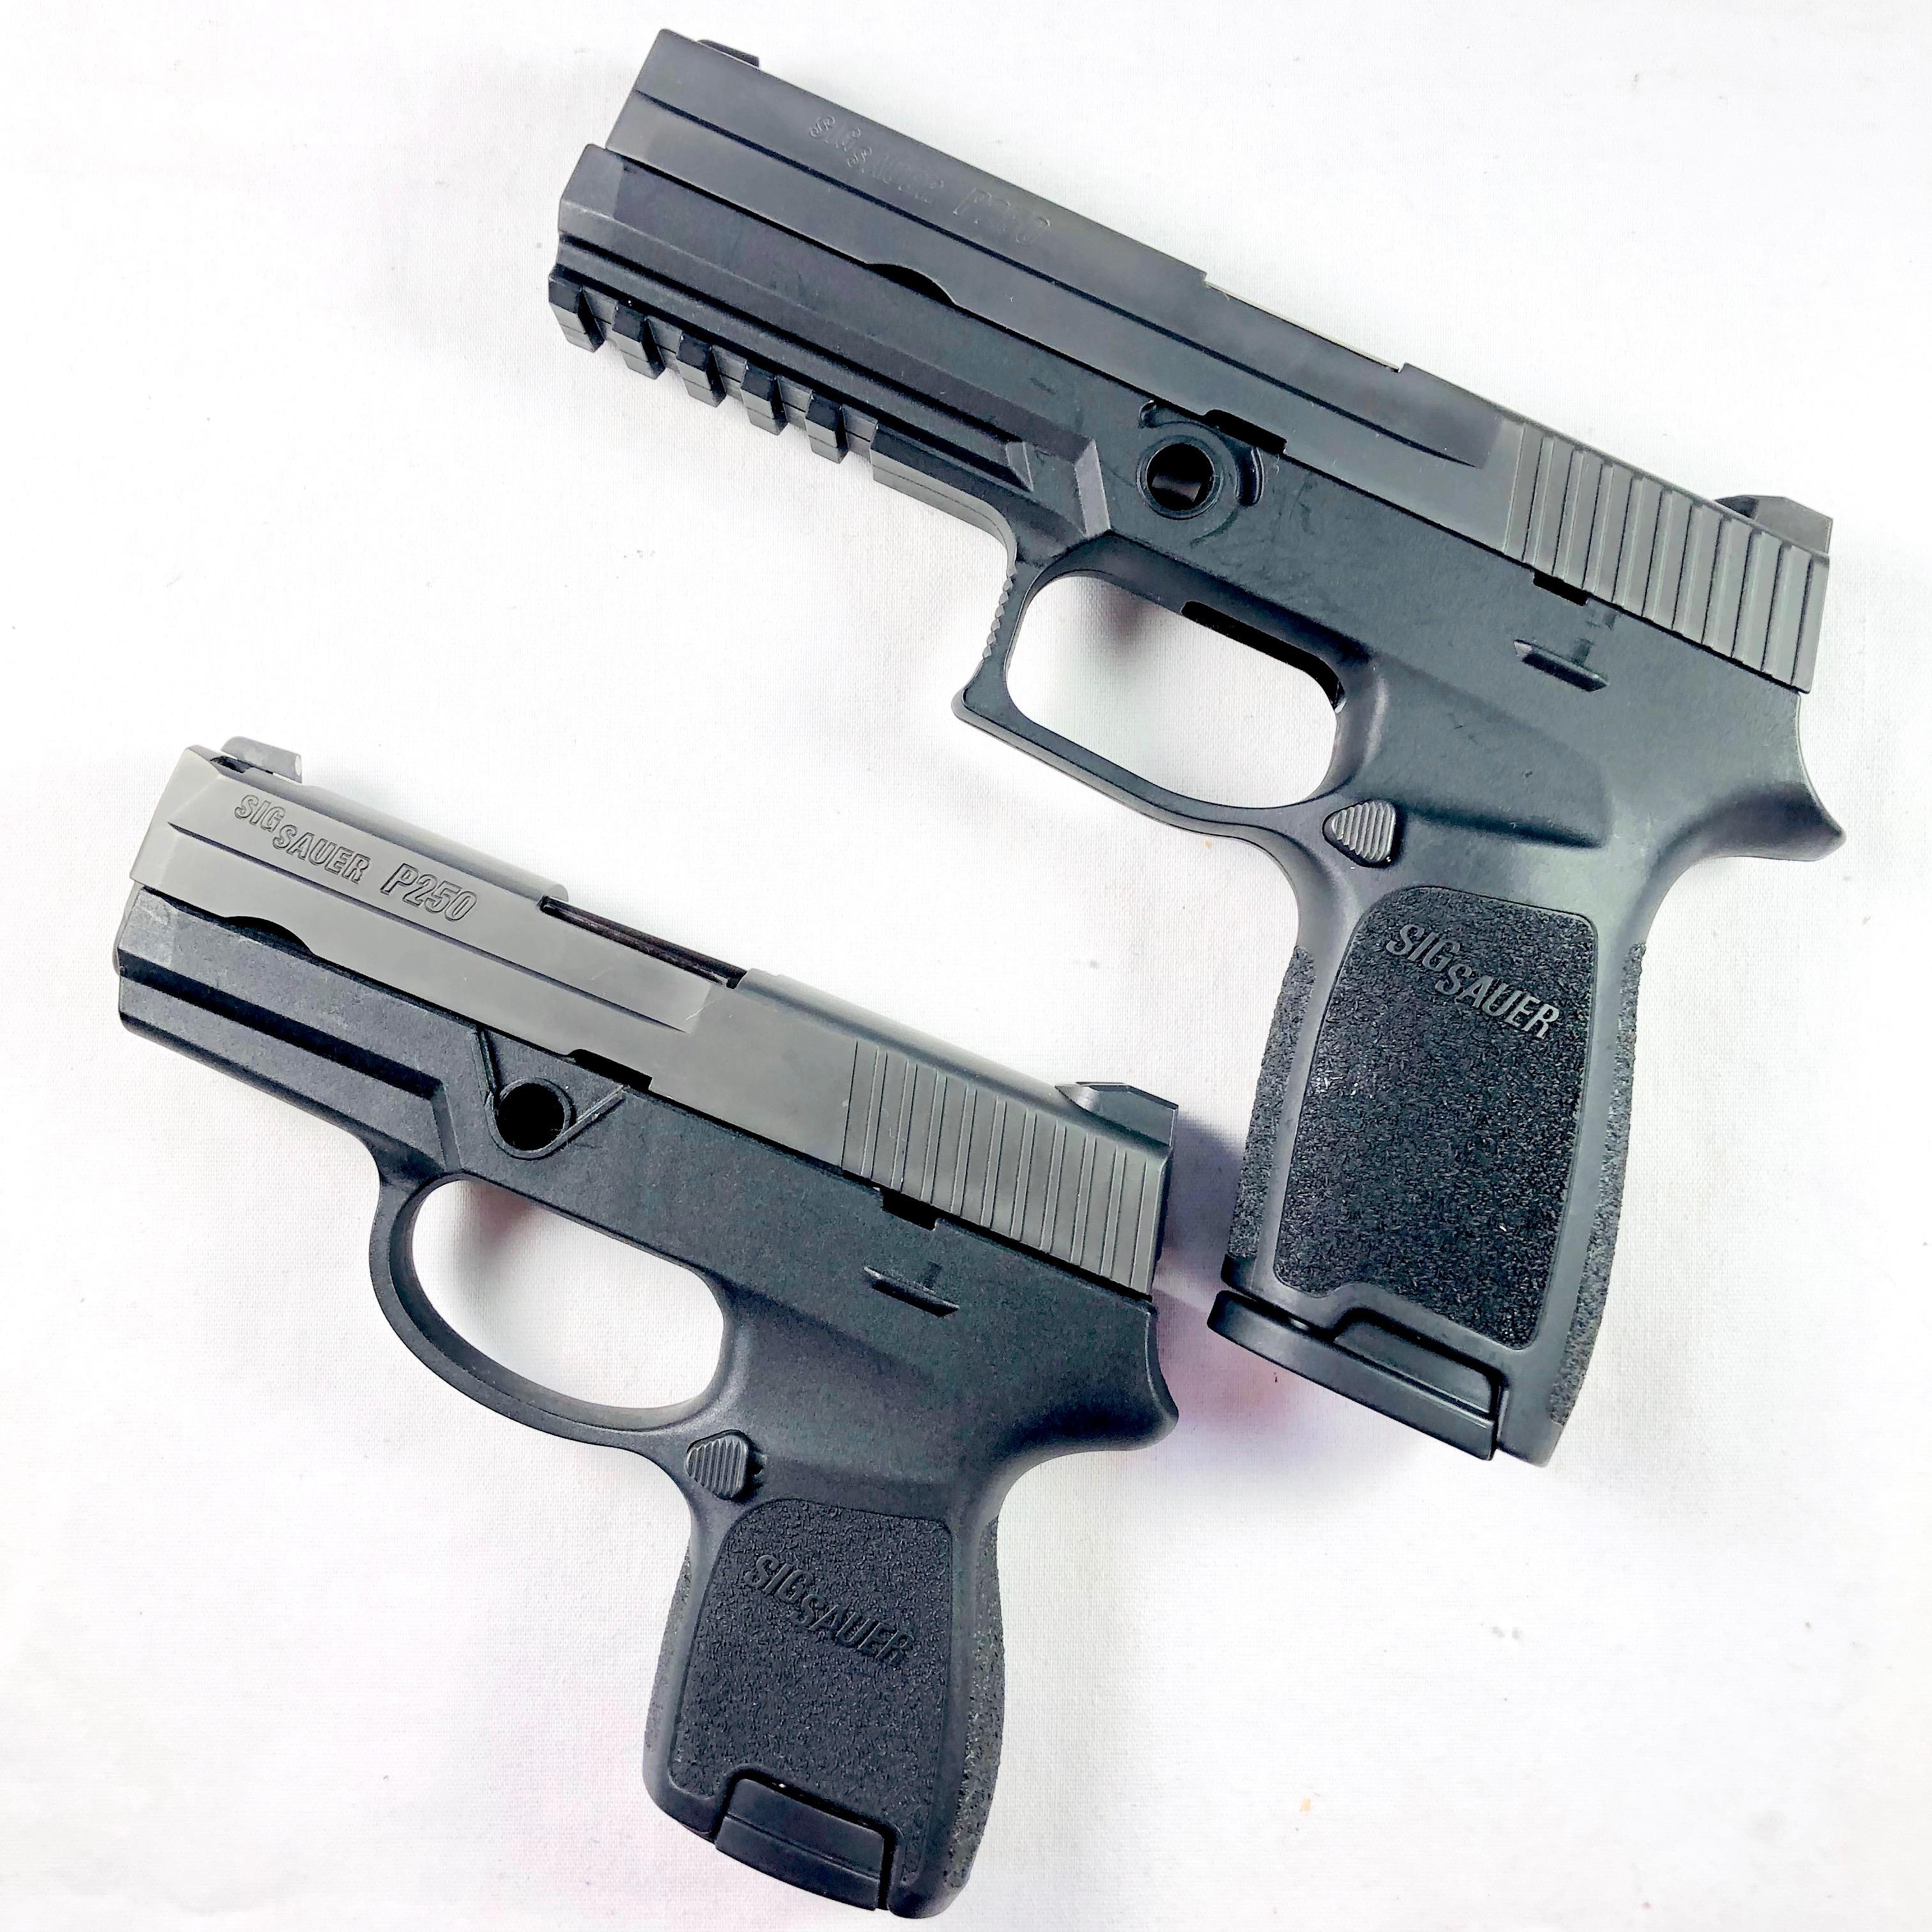 Boxed pair of like-new Sig Sauer P250 semi-automatic pistols, 9mm cal